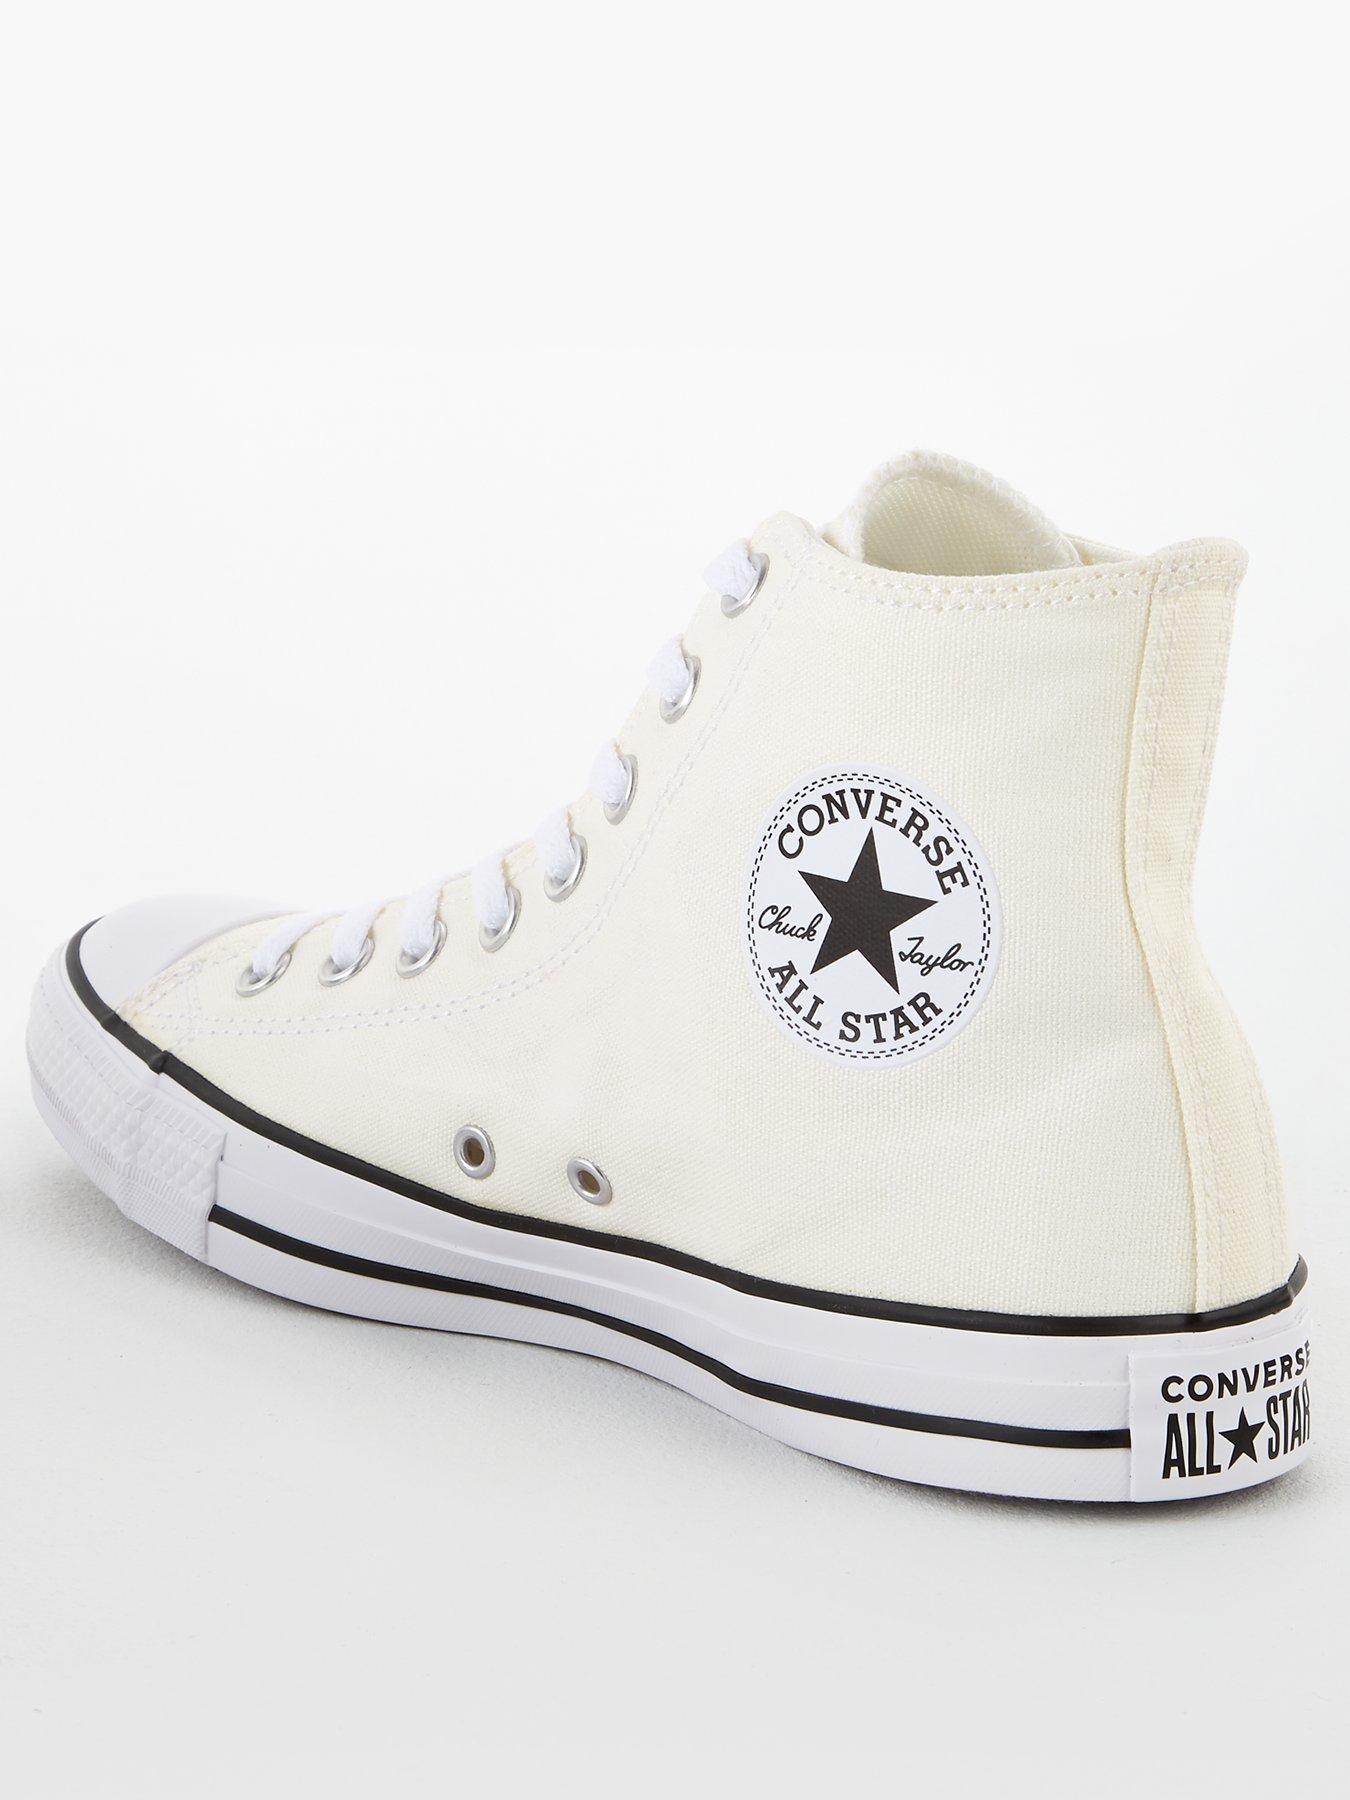 Converse Chuck Taylor All Star Smile Hi Top - White | littlewoods.com